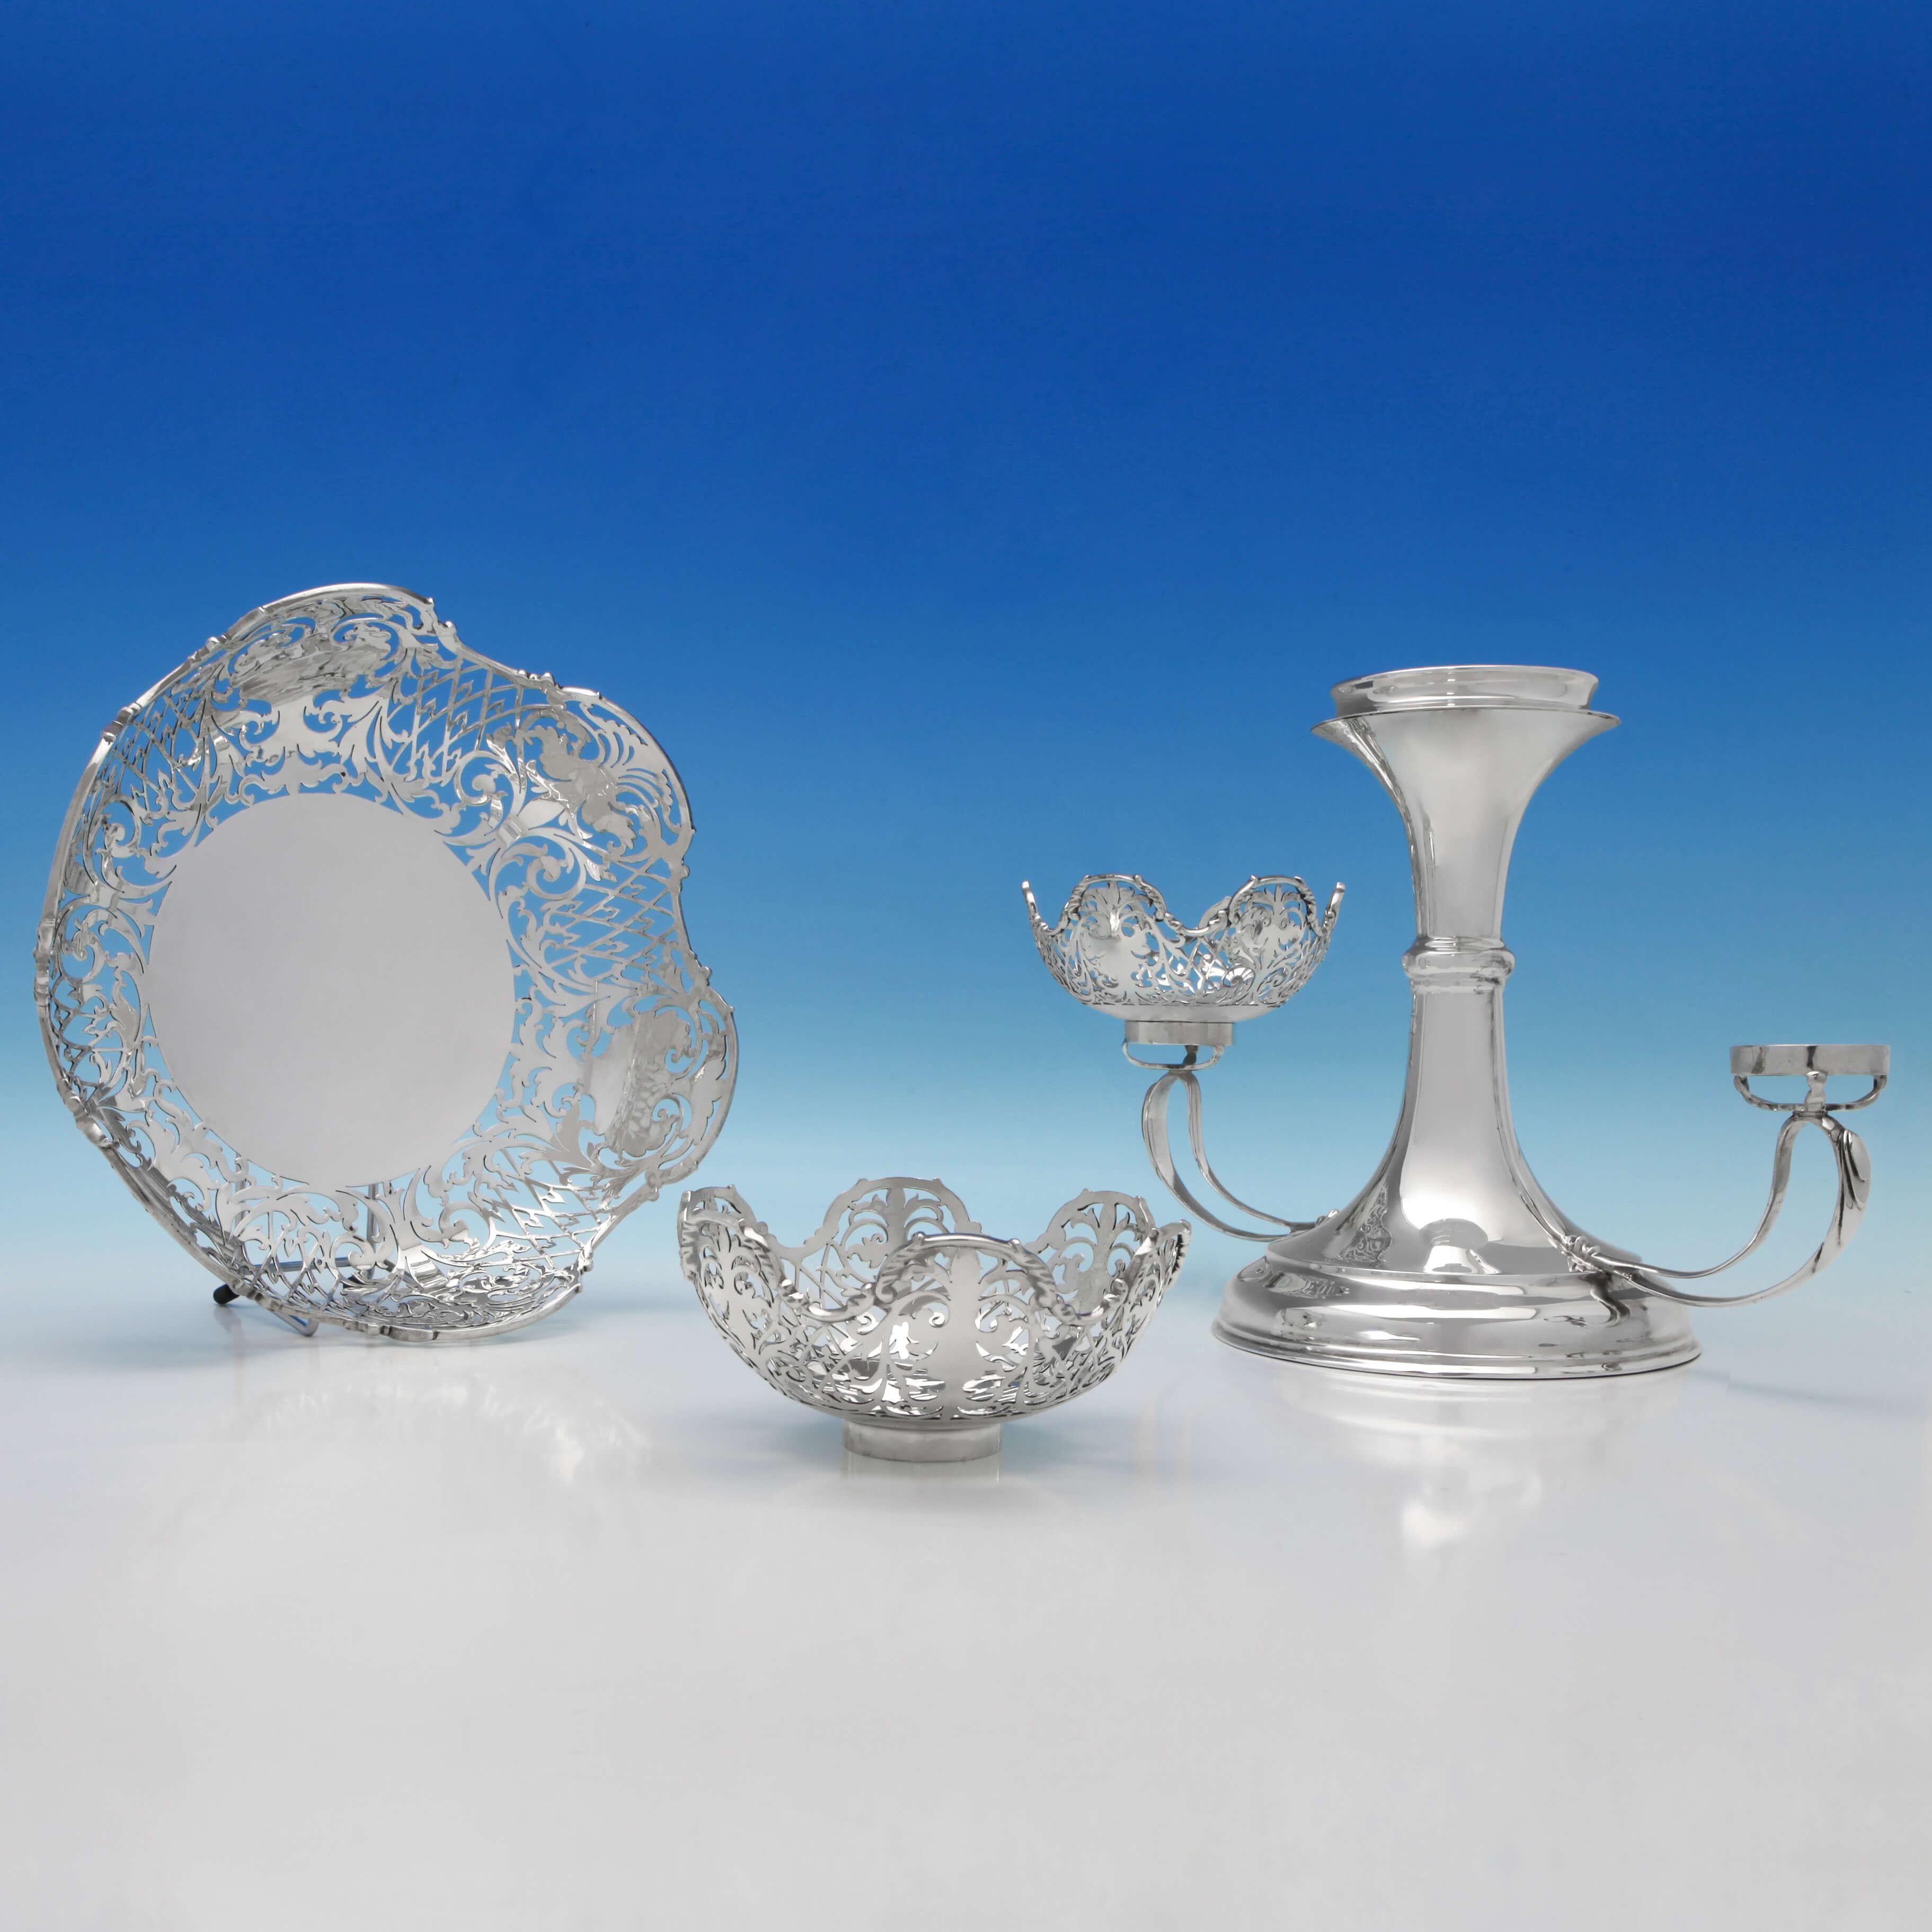 Hallmarked in London in 1906 by Jackson & Fullerton, this charming, Edwardian, antique sterling silver epergne, features a larger central bowl and two smaller side bowls, all with pierced decoration throughout. The epergne measures 11